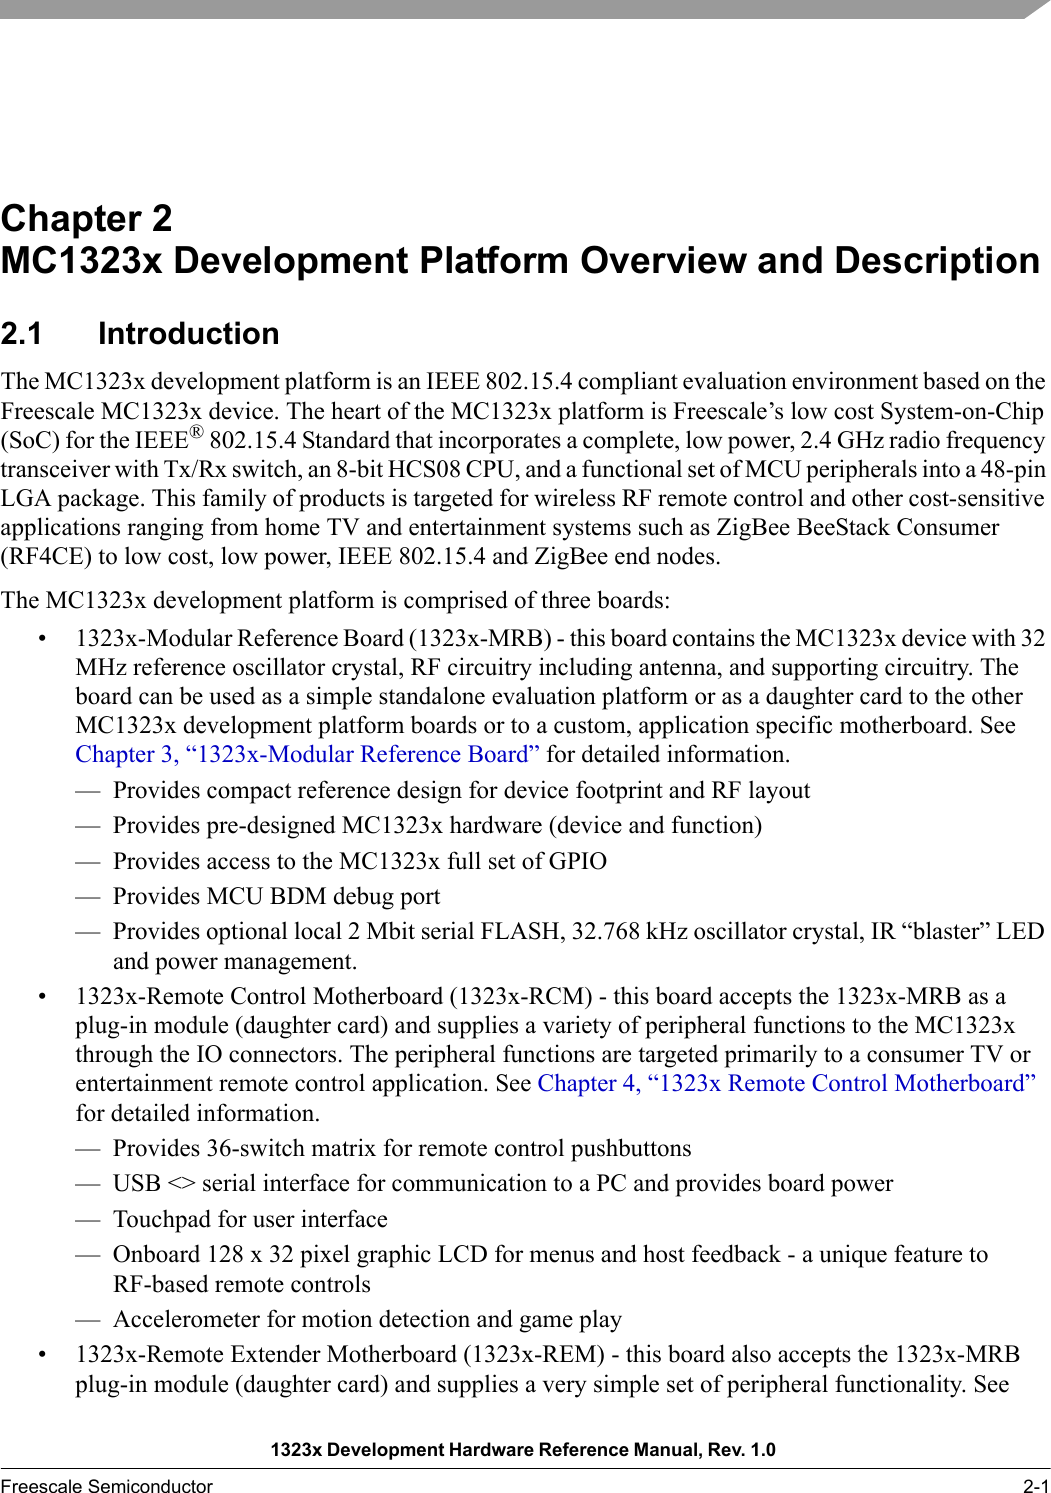 1323x Development Hardware Reference Manual, Rev. 1.0 Freescale Semiconductor 2-1Chapter 2  MC1323x Development Platform Overview and Description2.1 IntroductionThe MC1323x development platform is an IEEE 802.15.4 compliant evaluation environment based on the Freescale MC1323x device. The heart of the MC1323x platform is Freescale’s low cost System-on-Chip (SoC) for the IEEE® 802.15.4 Standard that incorporates a complete, low power, 2.4 GHz radio frequency transceiver with Tx/Rx switch, an 8-bit HCS08 CPU, and a functional set of MCU peripherals into a 48-pin LGA package. This family of products is targeted for wireless RF remote control and other cost-sensitive applications ranging from home TV and entertainment systems such as ZigBee BeeStack Consumer (RF4CE) to low cost, low power, IEEE 802.15.4 and ZigBee end nodes.The MC1323x development platform is comprised of three boards:• 1323x-Modular Reference Board (1323x-MRB) - this board contains the MC1323x device with 32 MHz reference oscillator crystal, RF circuitry including antenna, and supporting circuitry. The board can be used as a simple standalone evaluation platform or as a daughter card to the other MC1323x development platform boards or to a custom, application specific motherboard. See Chapter 3, “1323x-Modular Reference Board” for detailed information.— Provides compact reference design for device footprint and RF layout— Provides pre-designed MC1323x hardware (device and function)— Provides access to the MC1323x full set of GPIO— Provides MCU BDM debug port— Provides optional local 2 Mbit serial FLASH, 32.768 kHz oscillator crystal, IR “blaster” LED and power management.• 1323x-Remote Control Motherboard (1323x-RCM) - this board accepts the 1323x-MRB as a plug-in module (daughter card) and supplies a variety of peripheral functions to the MC1323x through the IO connectors. The peripheral functions are targeted primarily to a consumer TV or entertainment remote control application. See Chapter 4, “1323x Remote Control Motherboard” for detailed information.— Provides 36-switch matrix for remote control pushbuttons— USB &lt;&gt; serial interface for communication to a PC and provides board power— Touchpad for user interface— Onboard 128 x 32 pixel graphic LCD for menus and host feedback - a unique feature to RF-based remote controls— Accelerometer for motion detection and game play• 1323x-Remote Extender Motherboard (1323x-REM) - this board also accepts the 1323x-MRB plug-in module (daughter card) and supplies a very simple set of peripheral functionality. See 